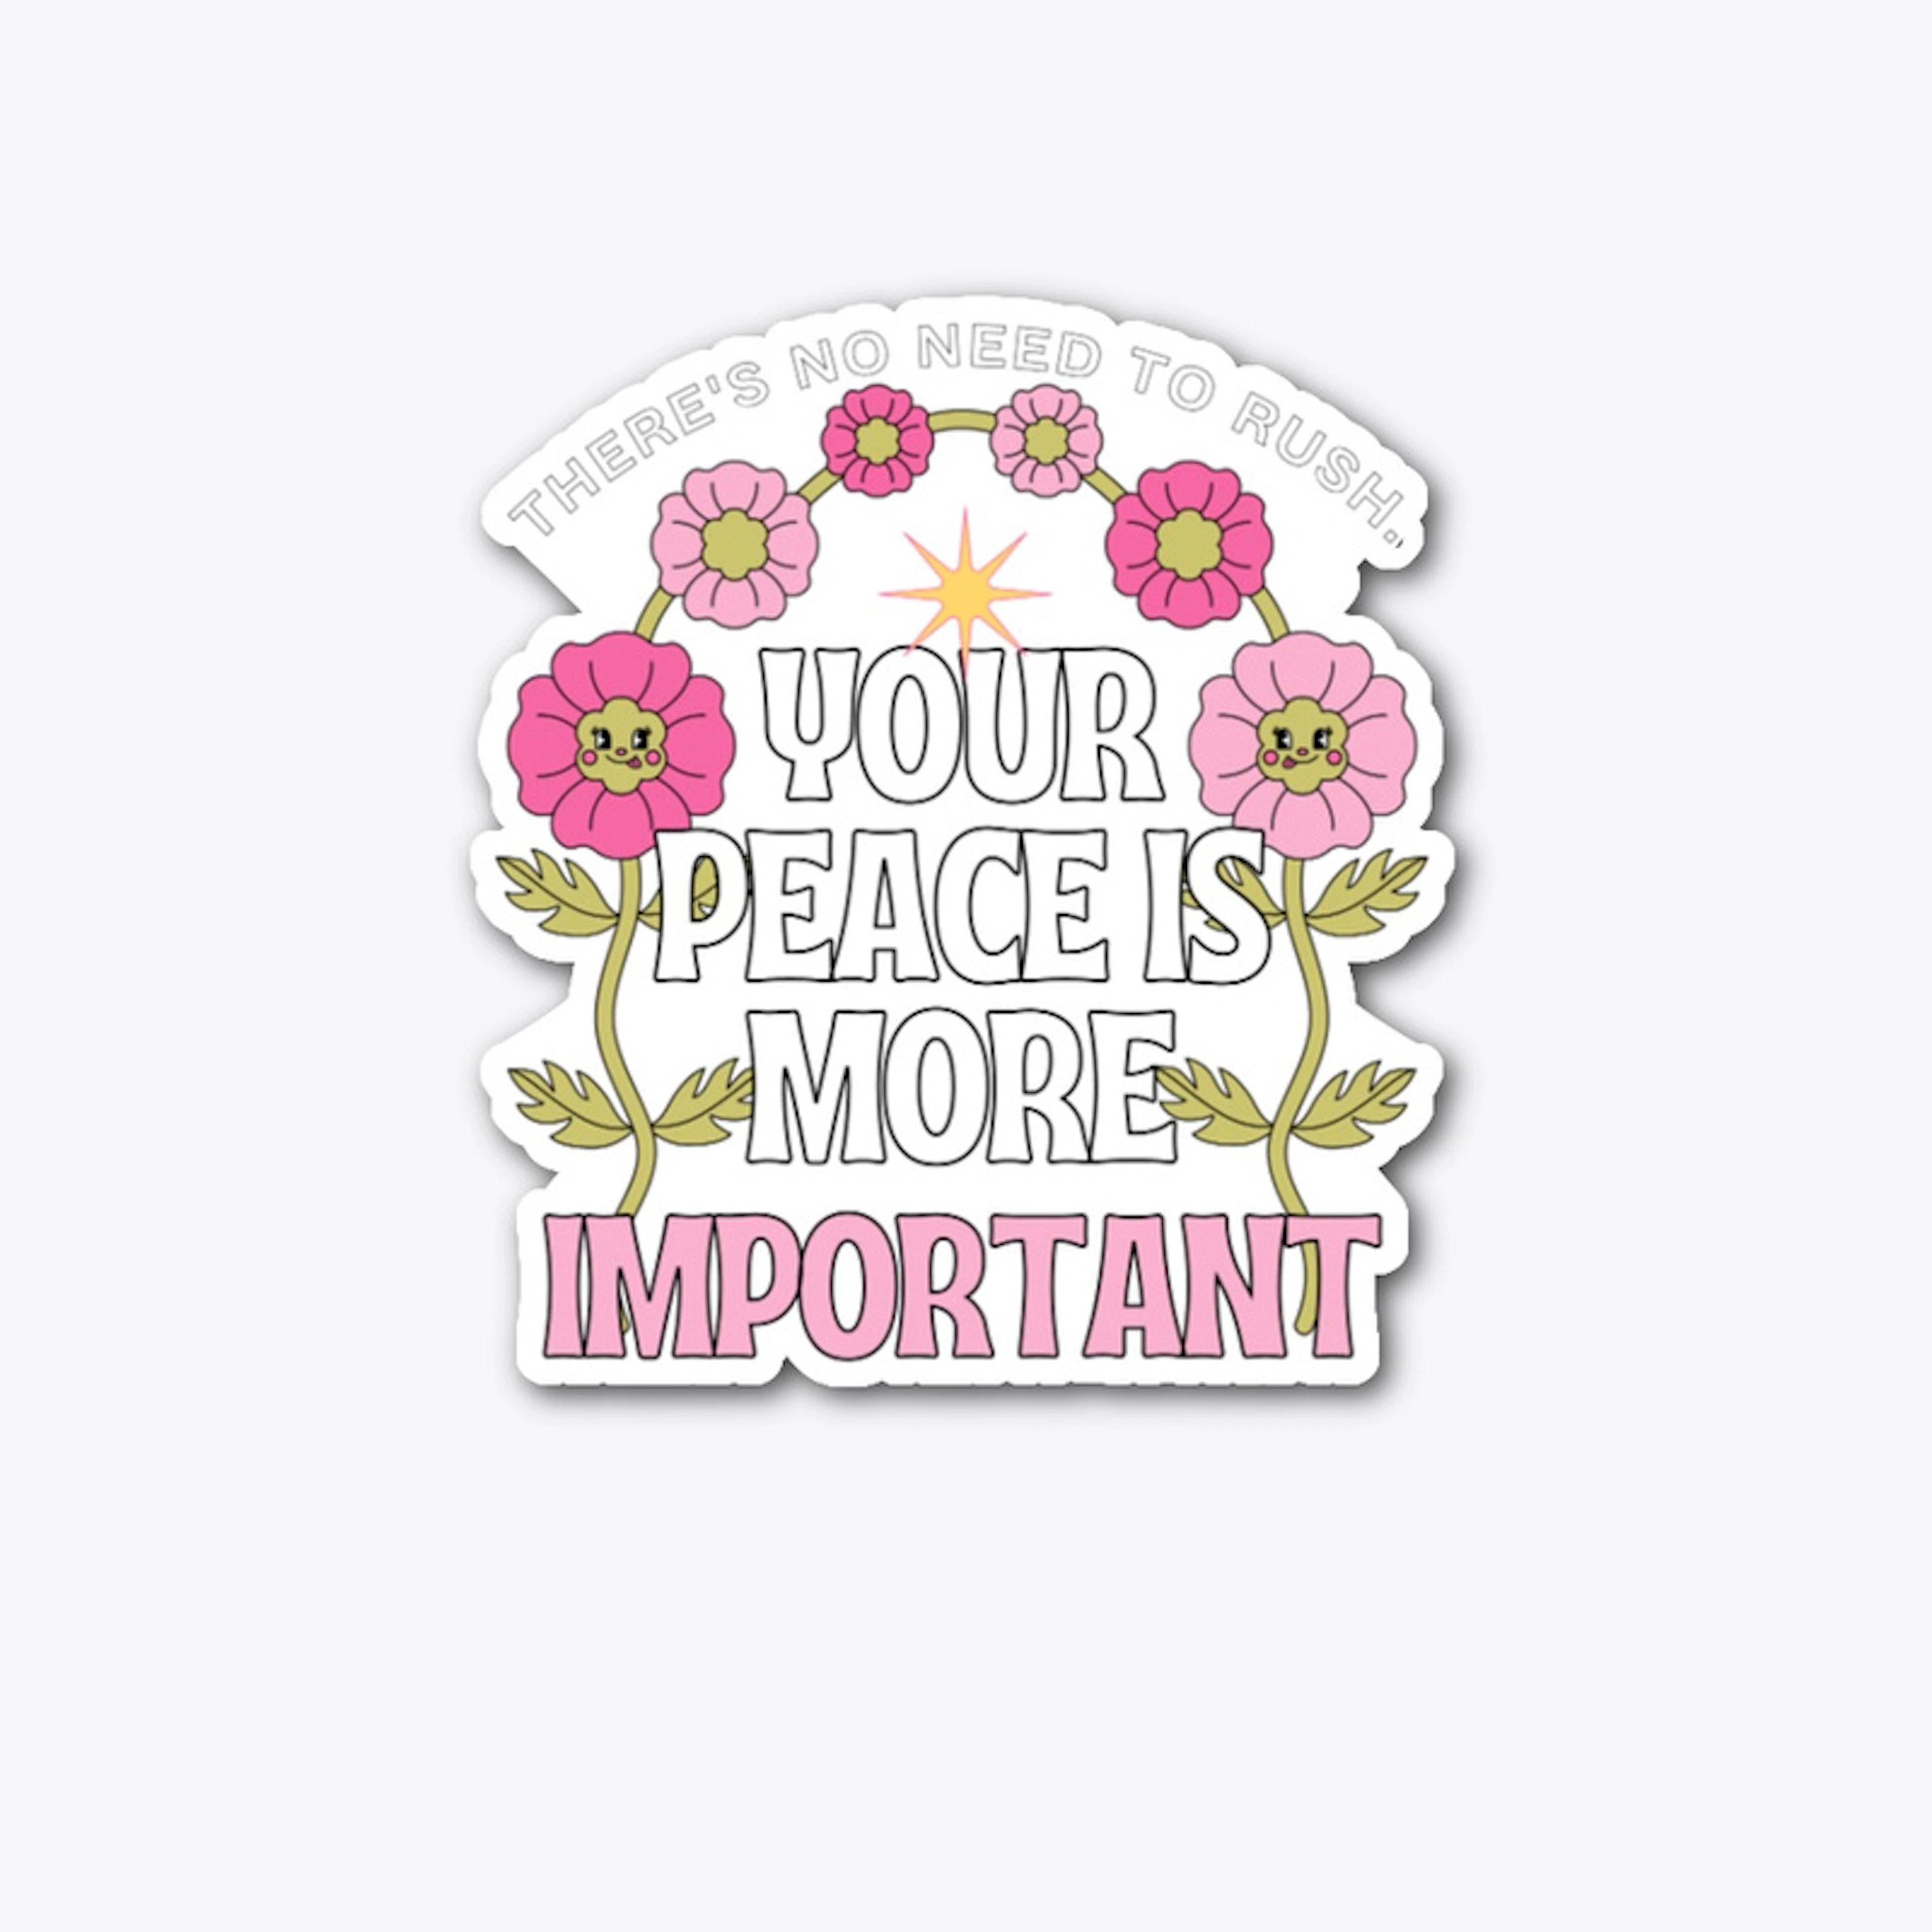 YOUR PEACE IS MORE IMPORTANT